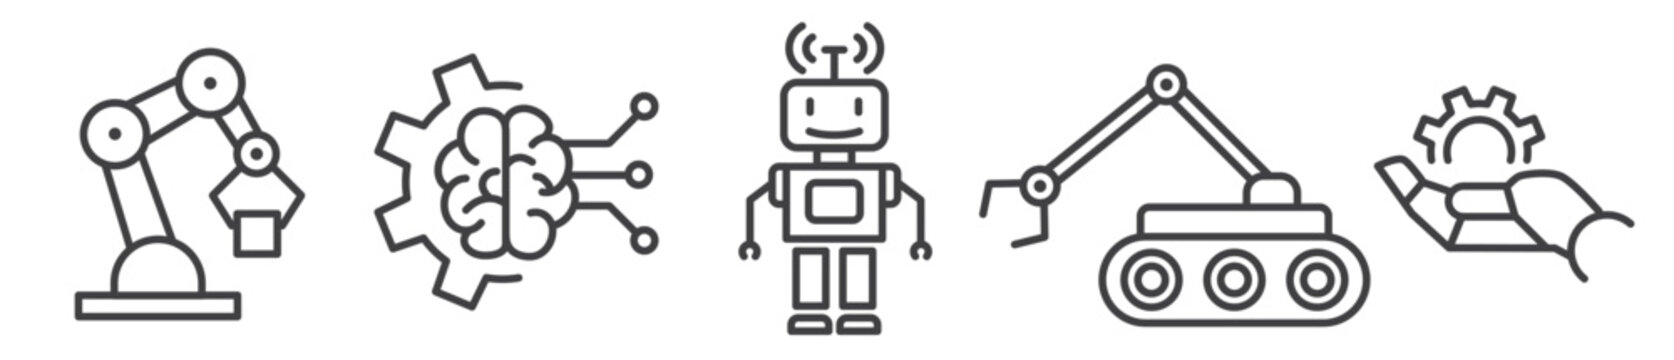 Robotics and futuristic technology vector thin line icon collection on white background